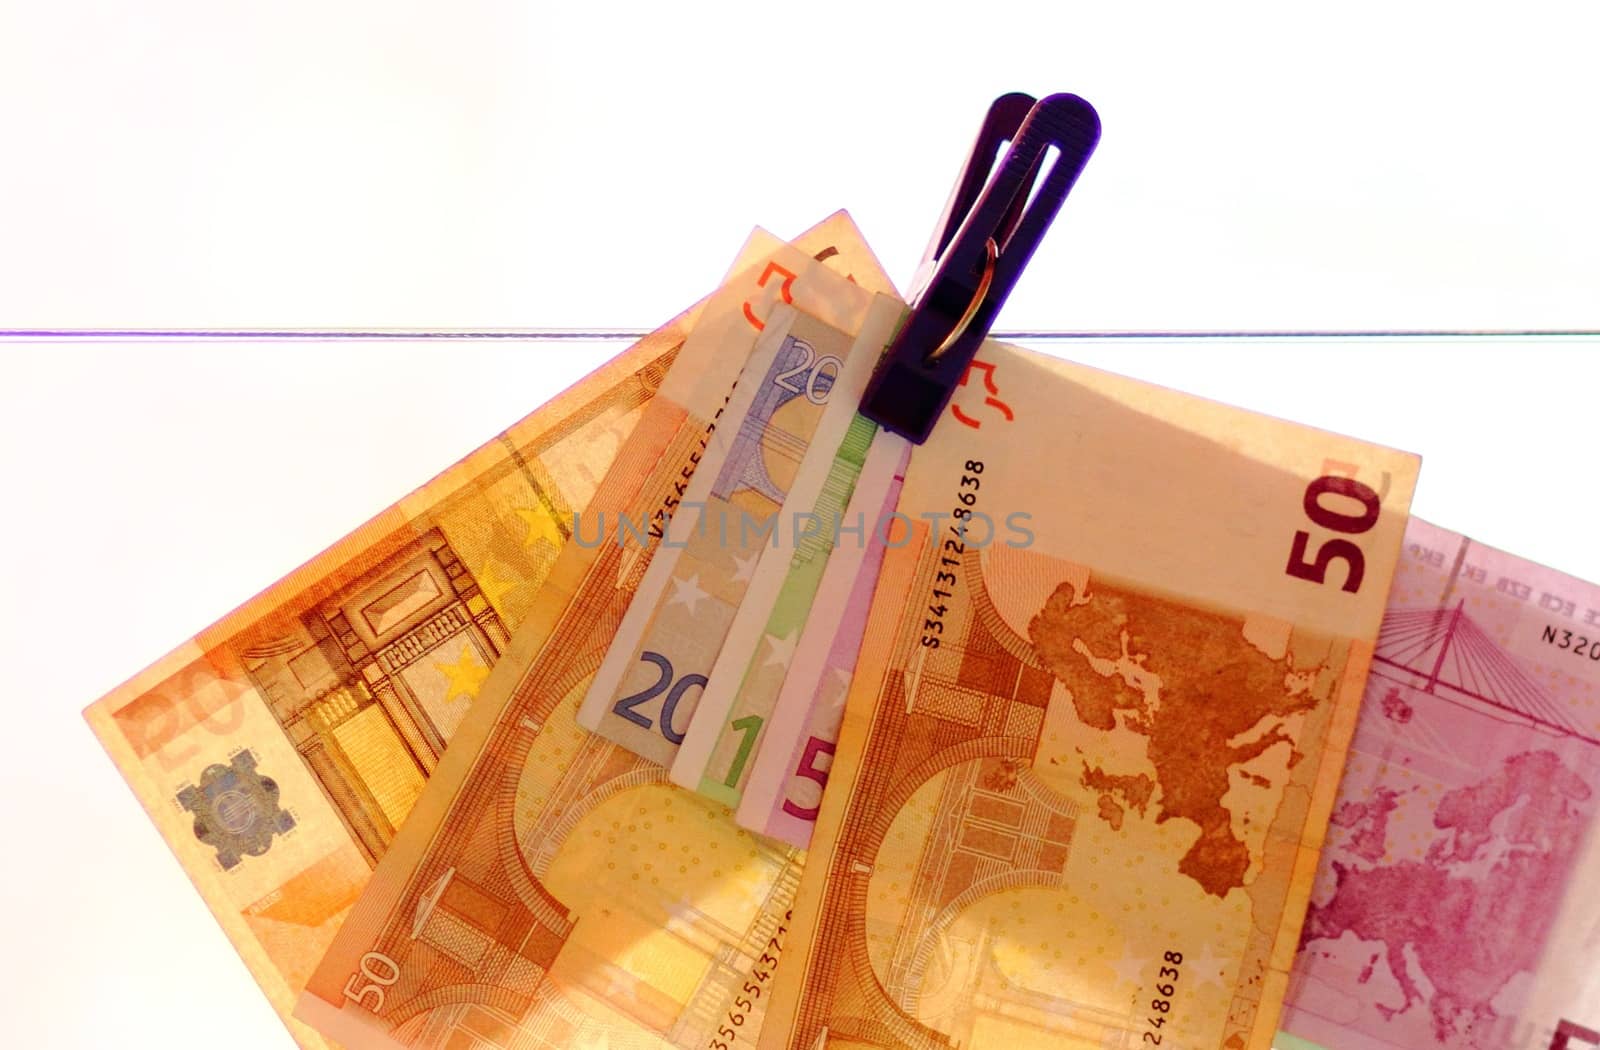 New Year 2015 lined with euro banknotes